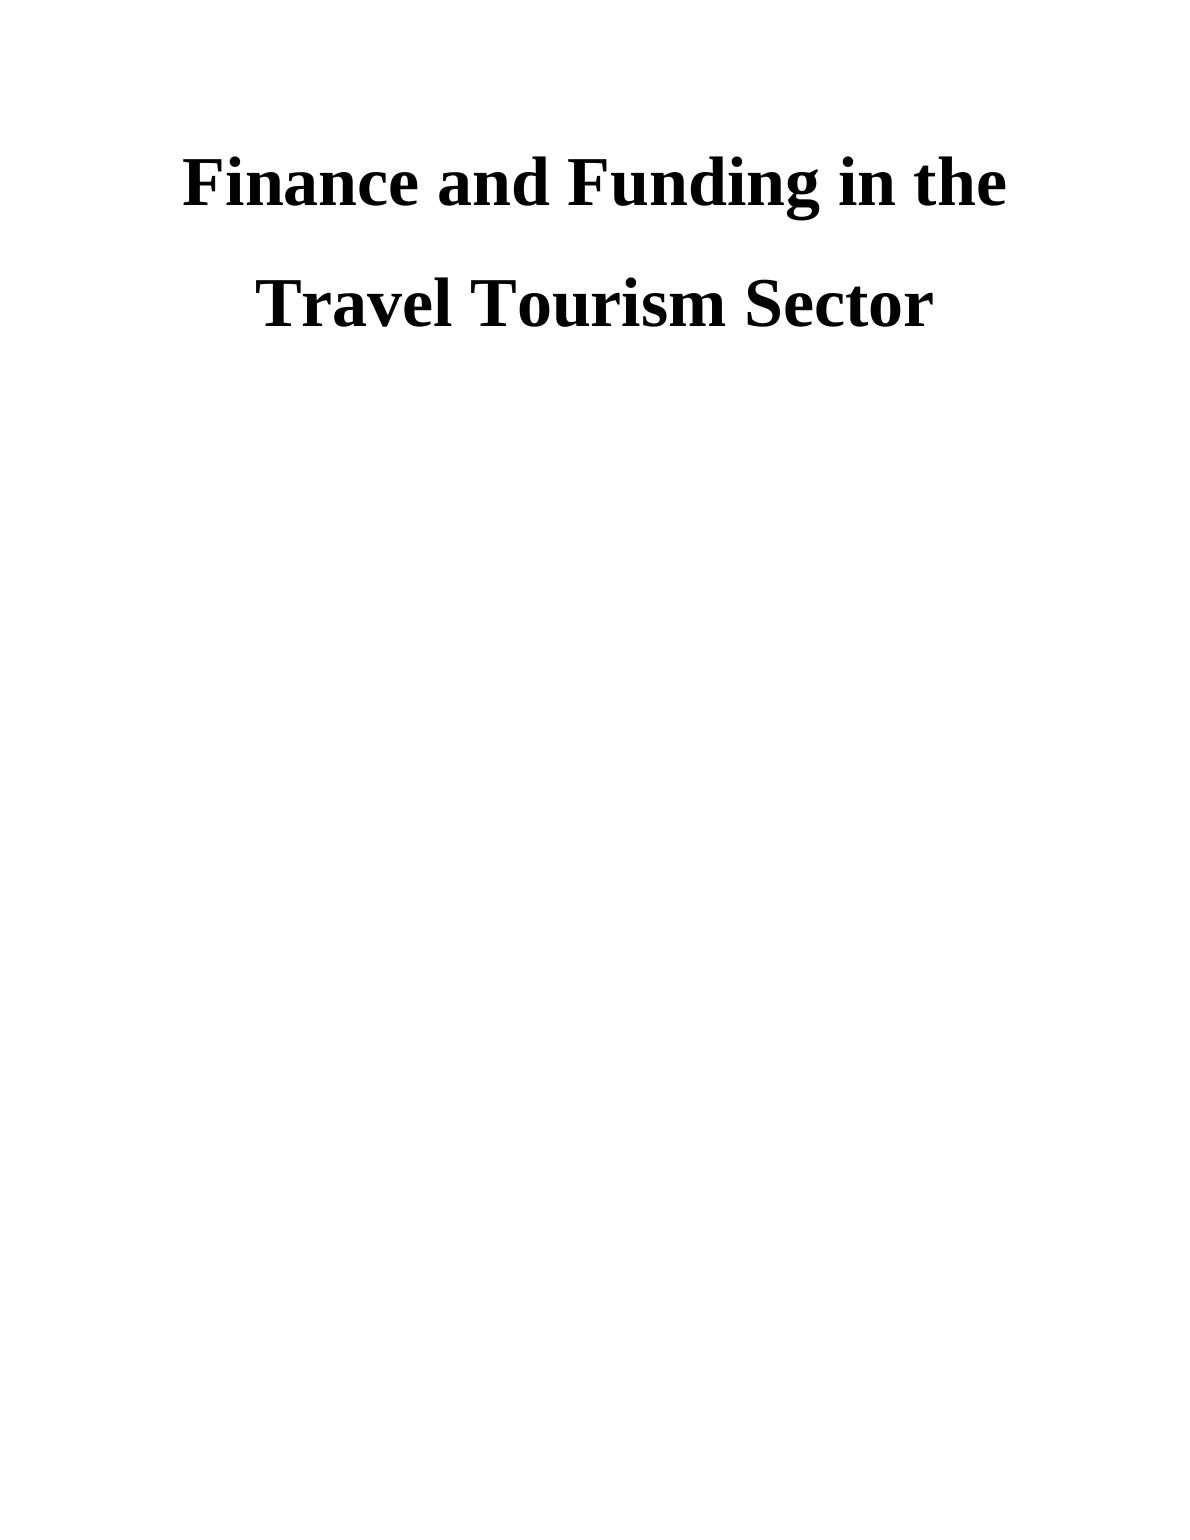 Finance and Funding in the Travel Tourism Sector_1